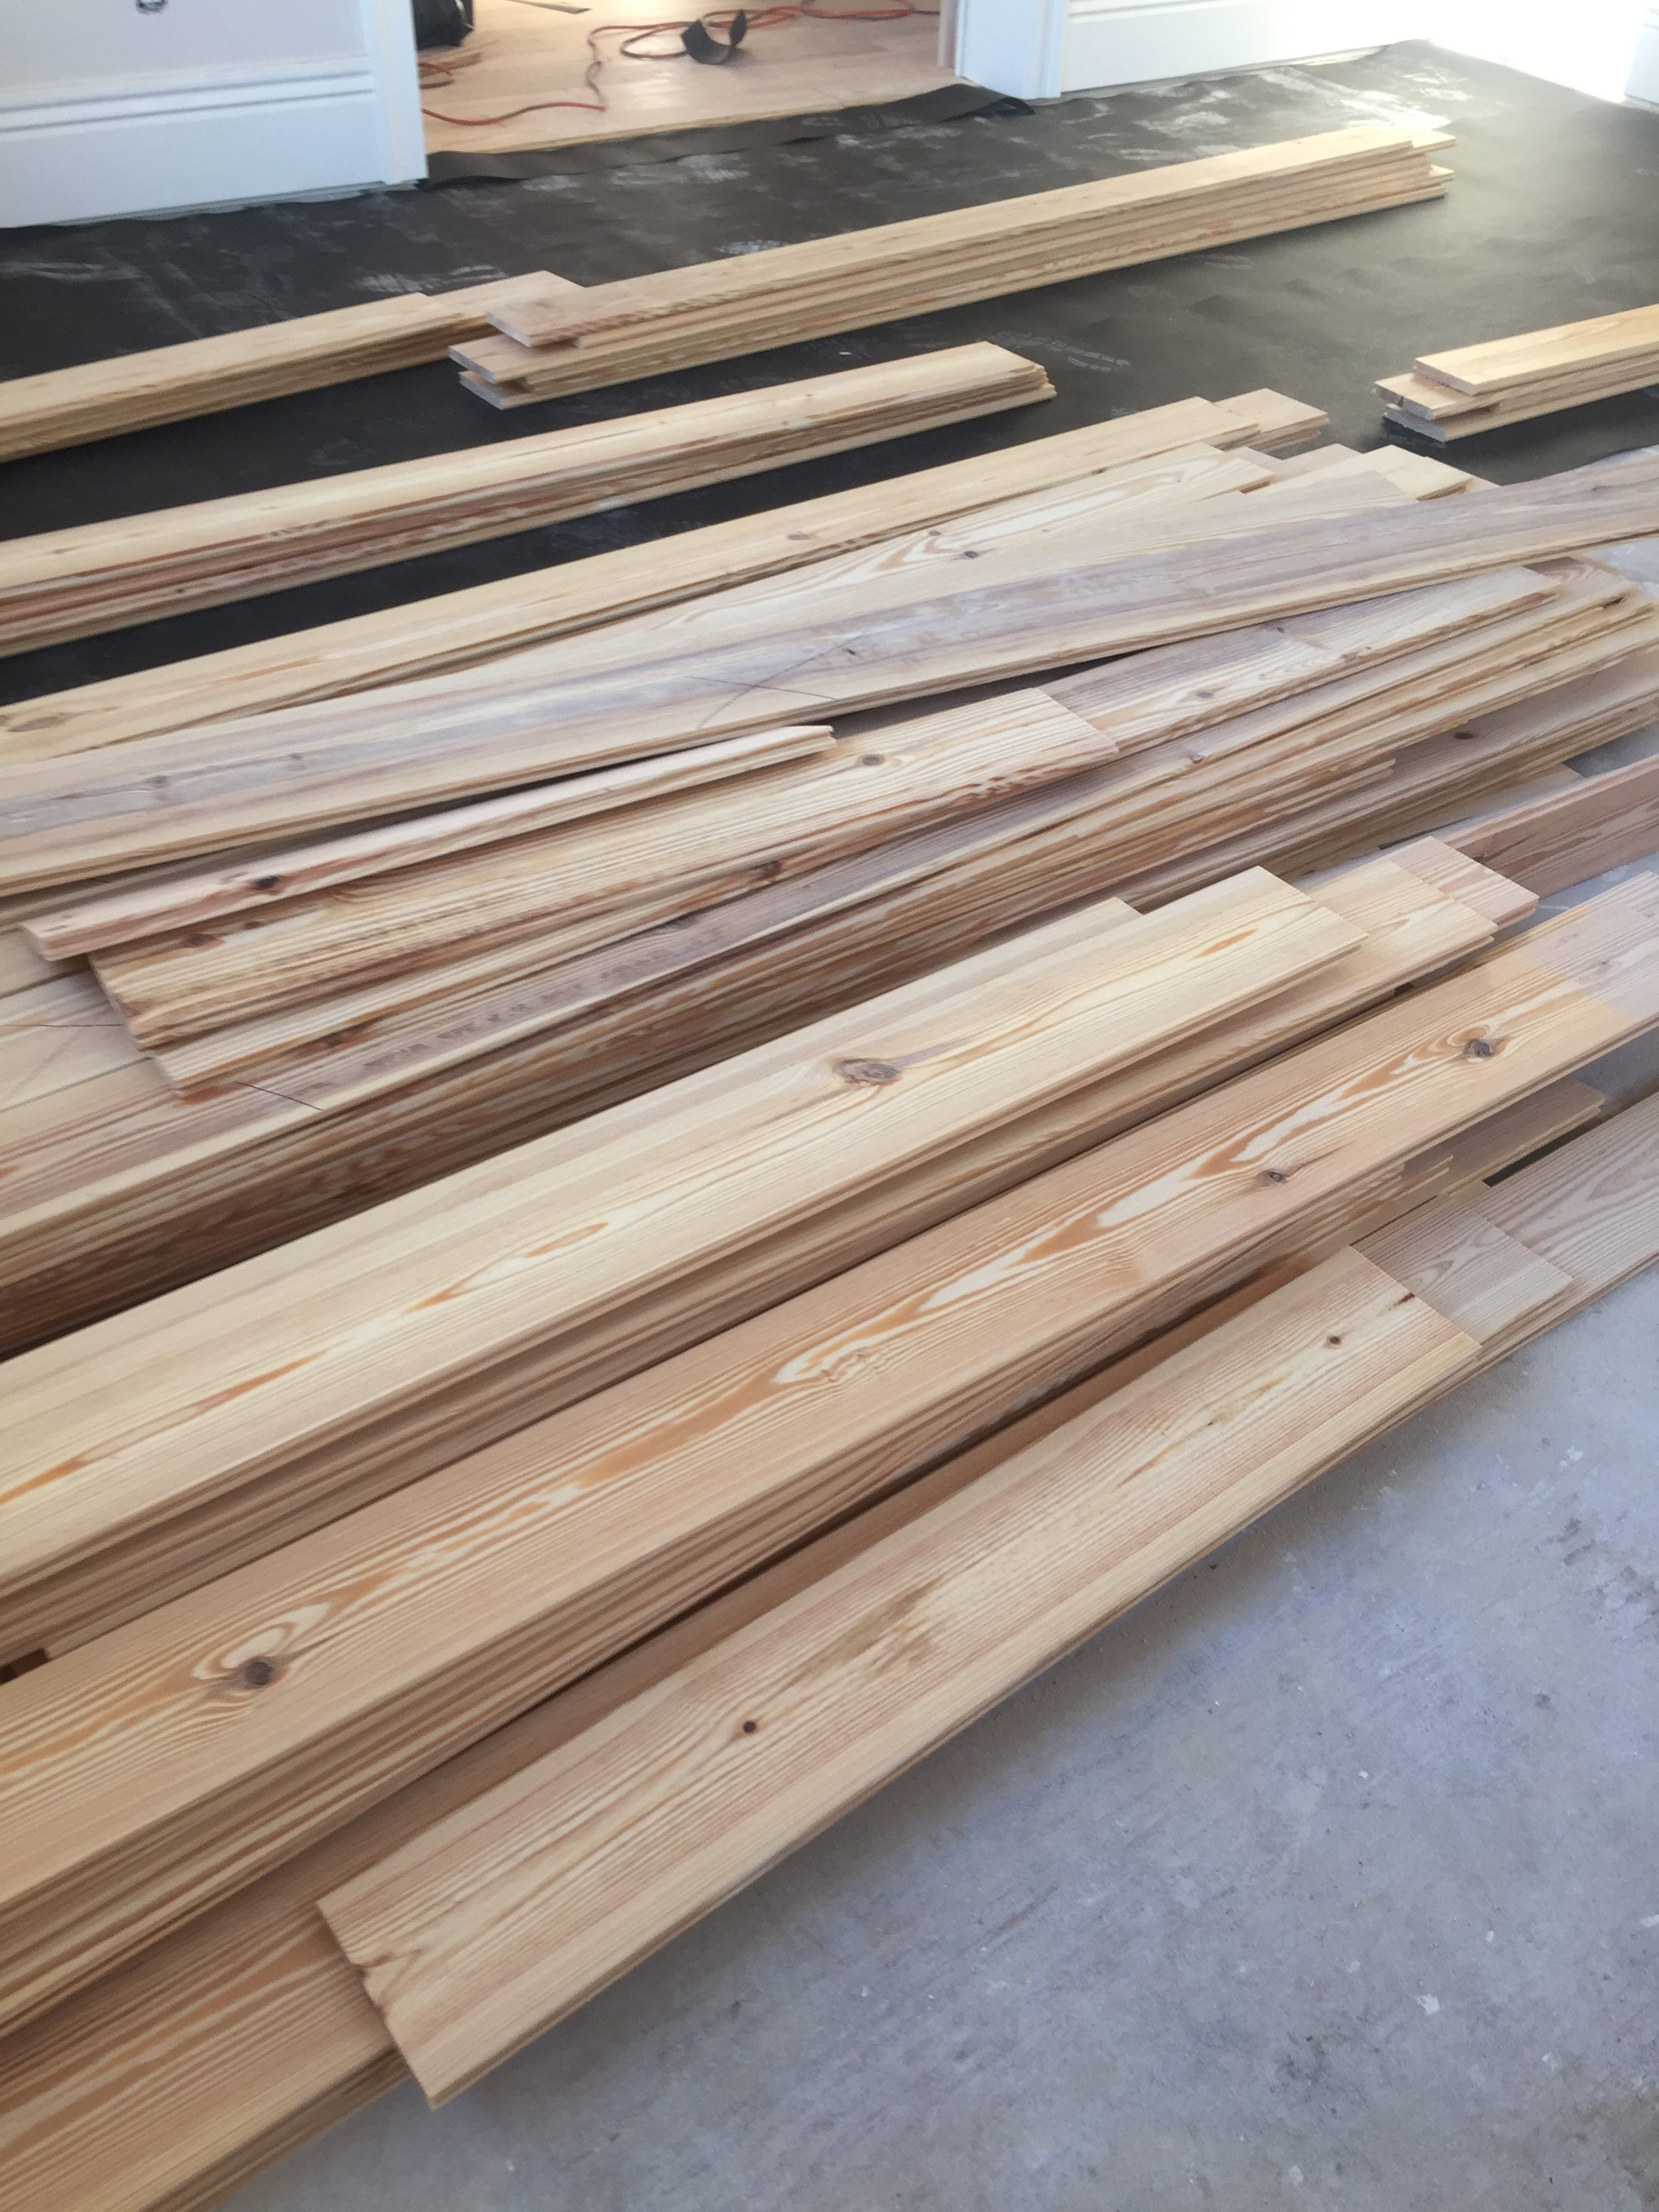 Pile of wooden planks